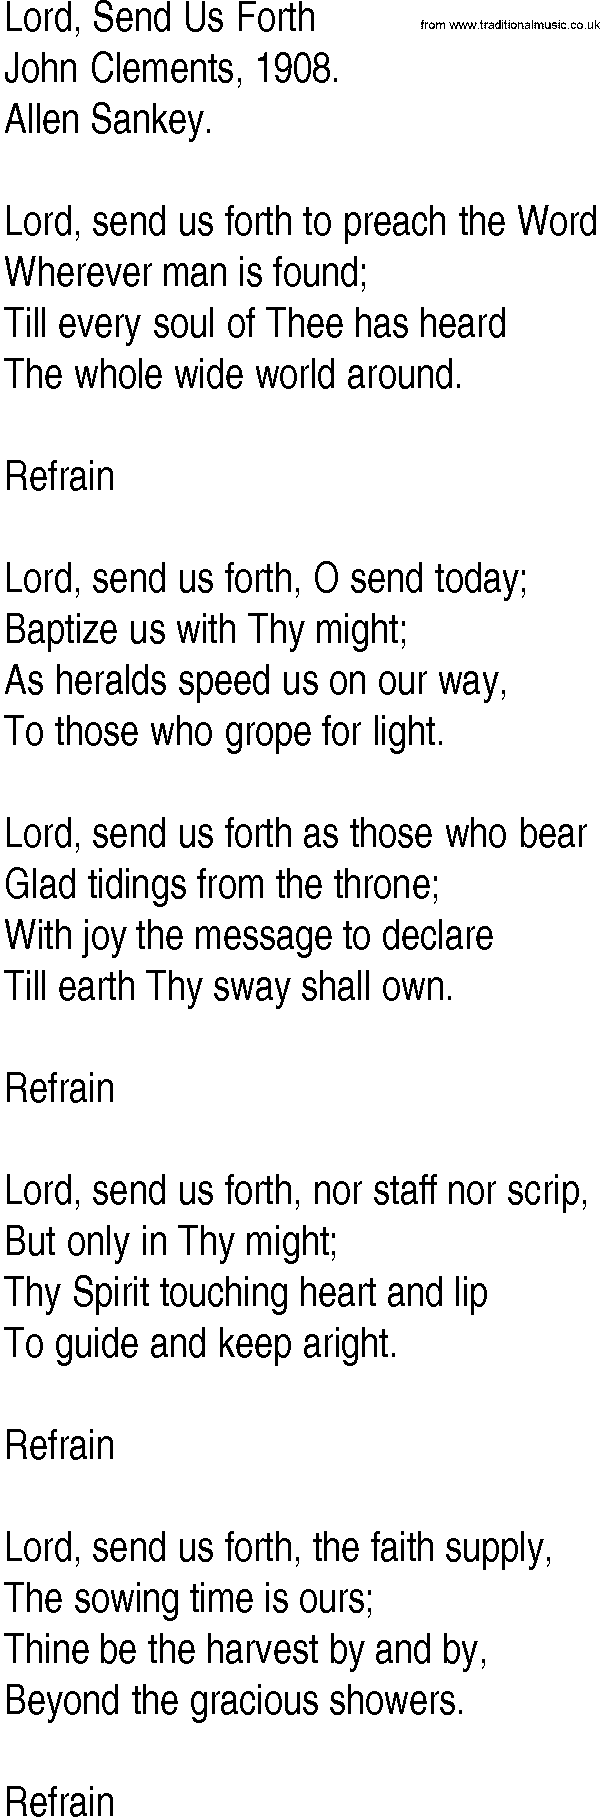 Hymn and Gospel Song: Lord, Send Us Forth by John Clements lyrics